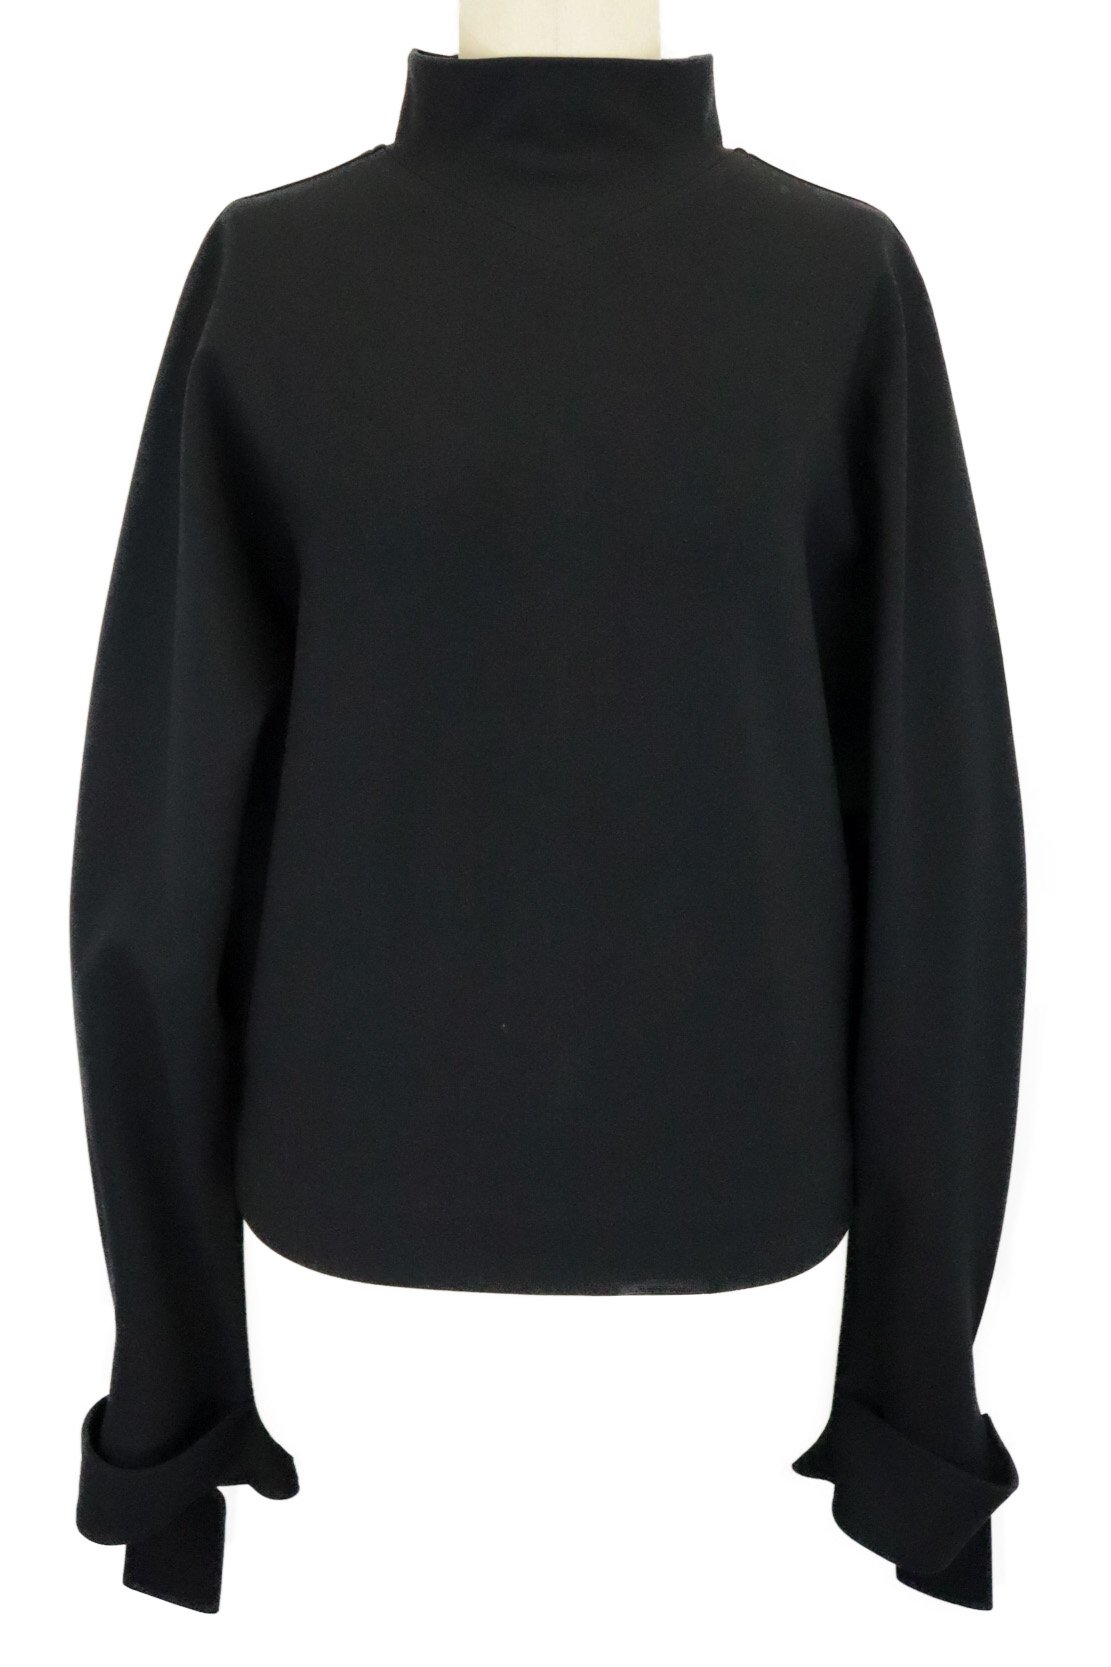 <img class='new_mark_img1' src='https://img.shop-pro.jp/img/new/icons47.gif' style='border:none;display:inline;margin:0px;padding:0px;width:auto;' />VICTORIA BECKHAM Turtle jersey tops (BLACK)